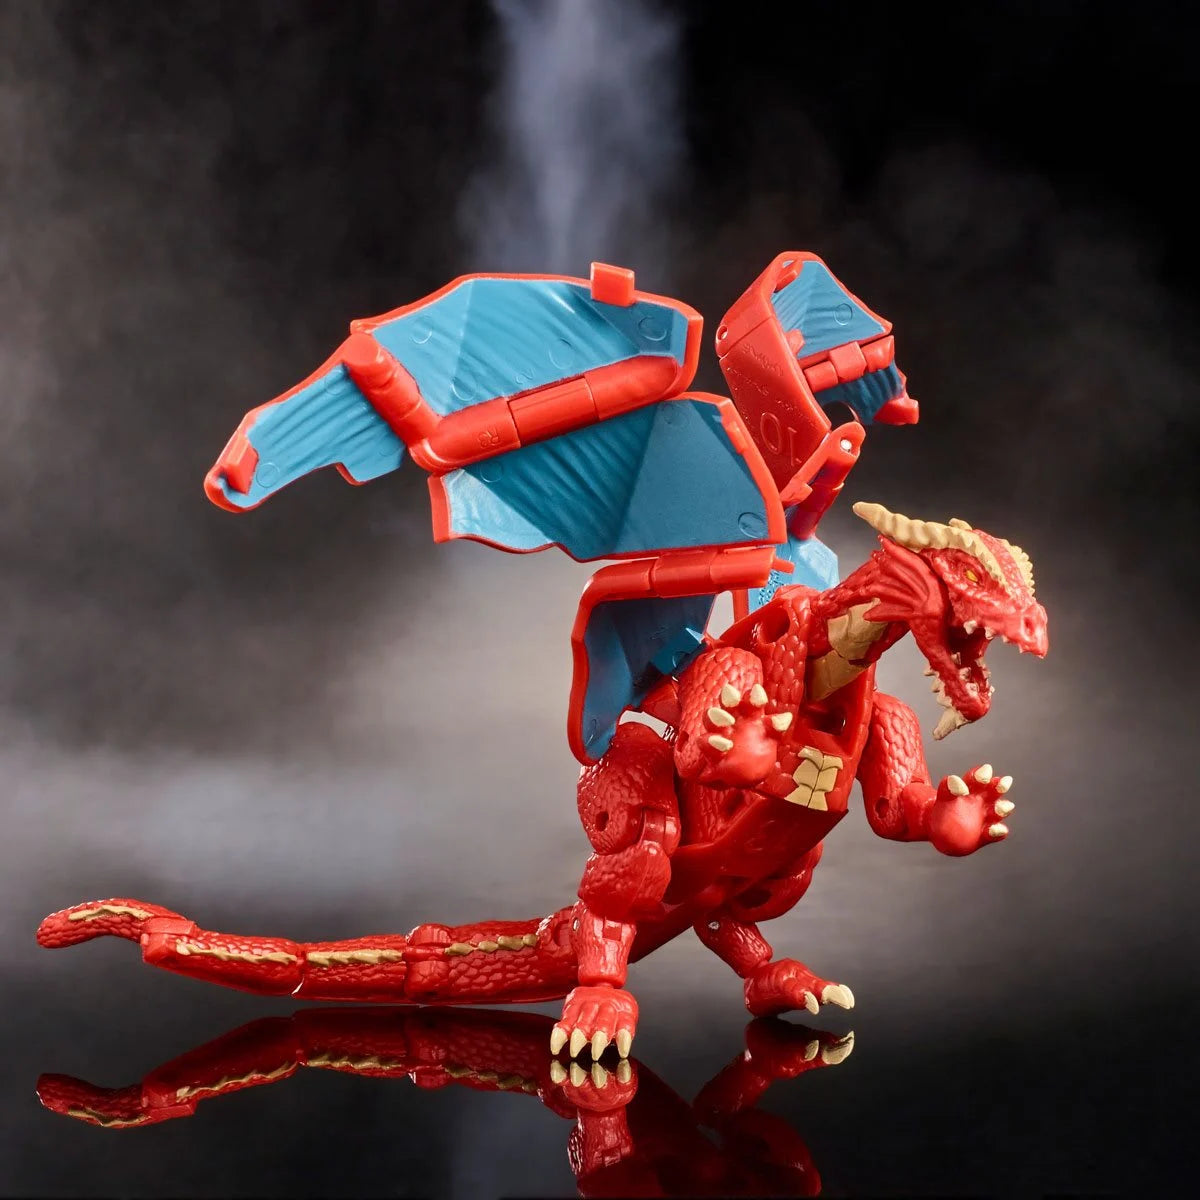 Dungeons & Dragons Honor Among Thieves Dicelings Red Dragon Figure